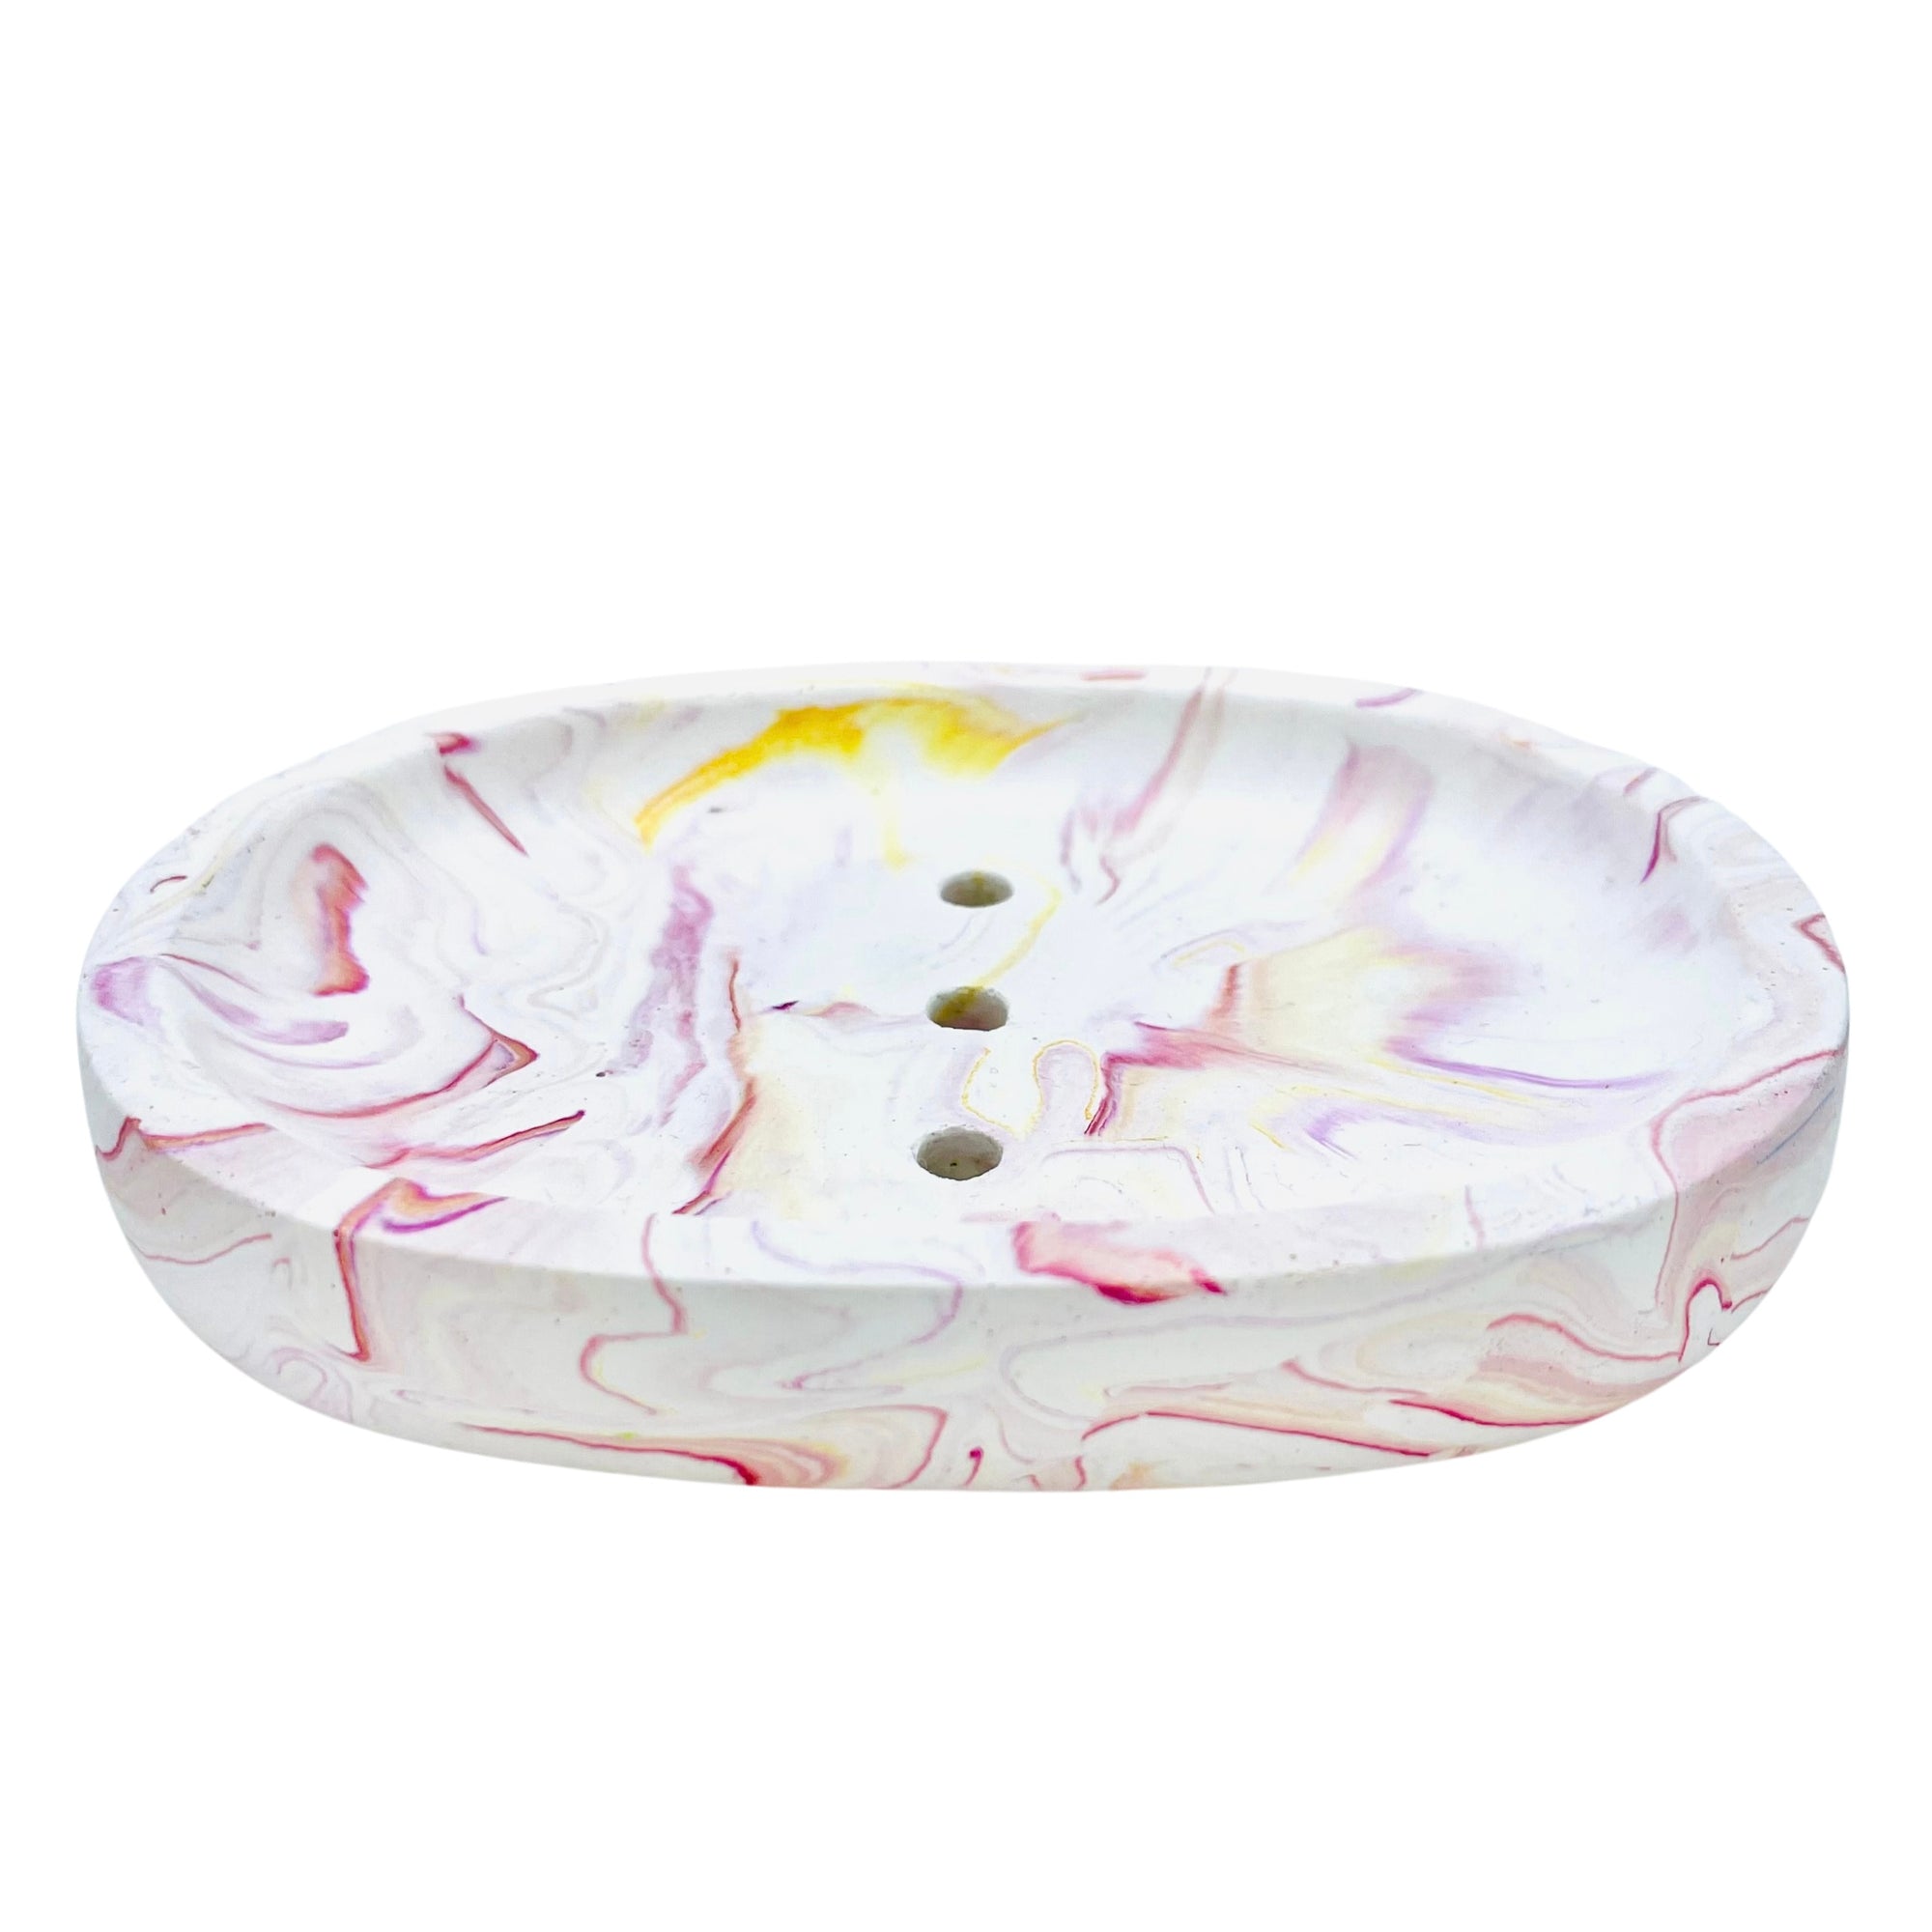 This oval Jesmonite soapdish measures 13.3cm in length and is marbled with magenta pigment.